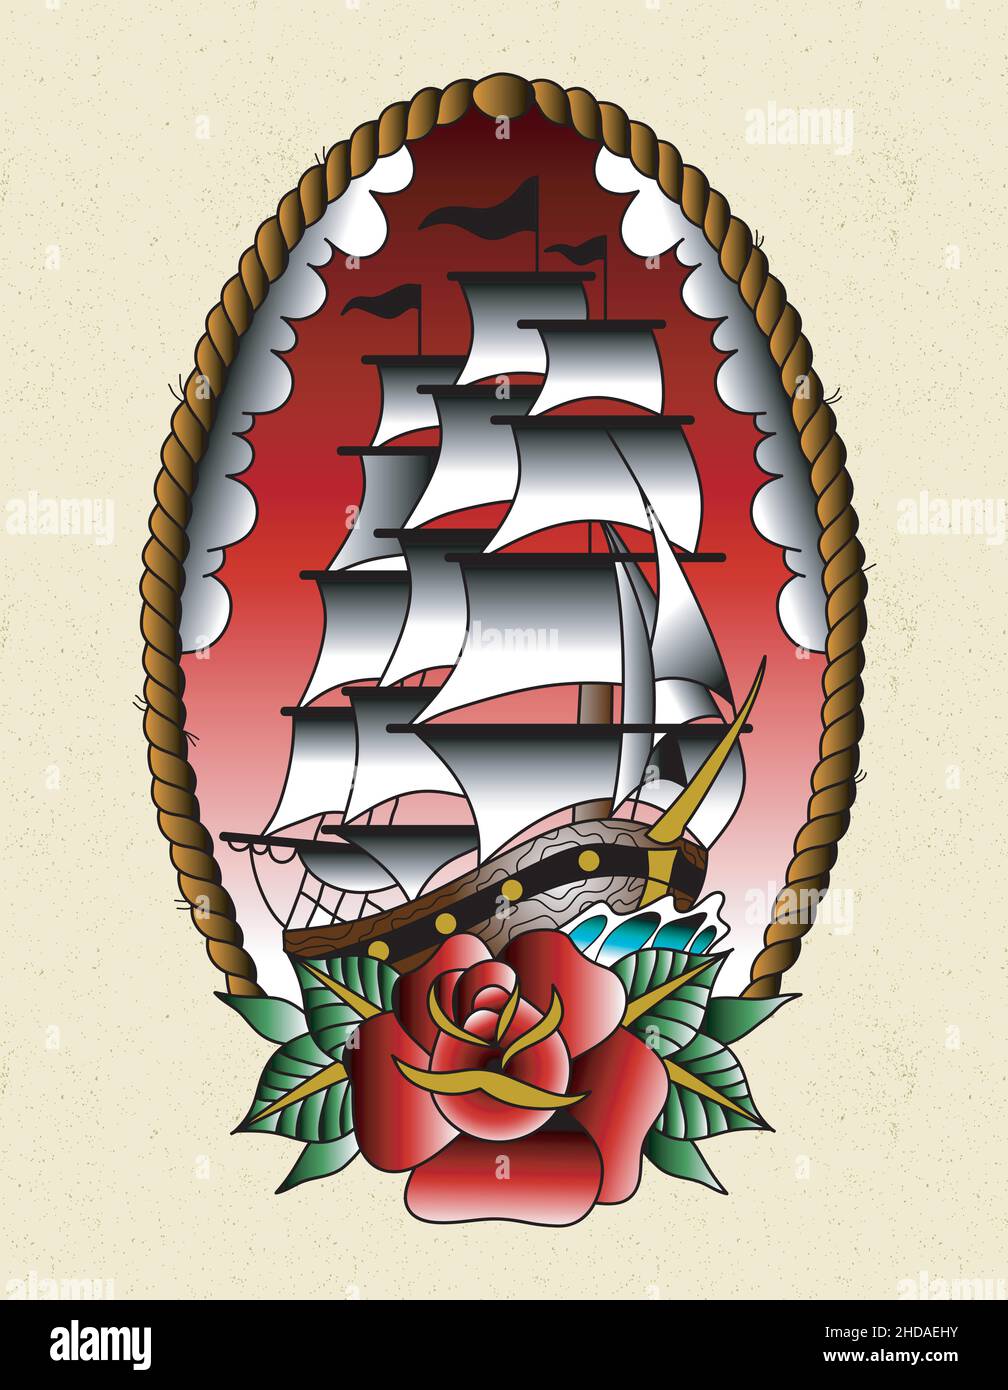 85 Striking Pirate Ship Tattoo Designs  Bonding with Masters of the Seas